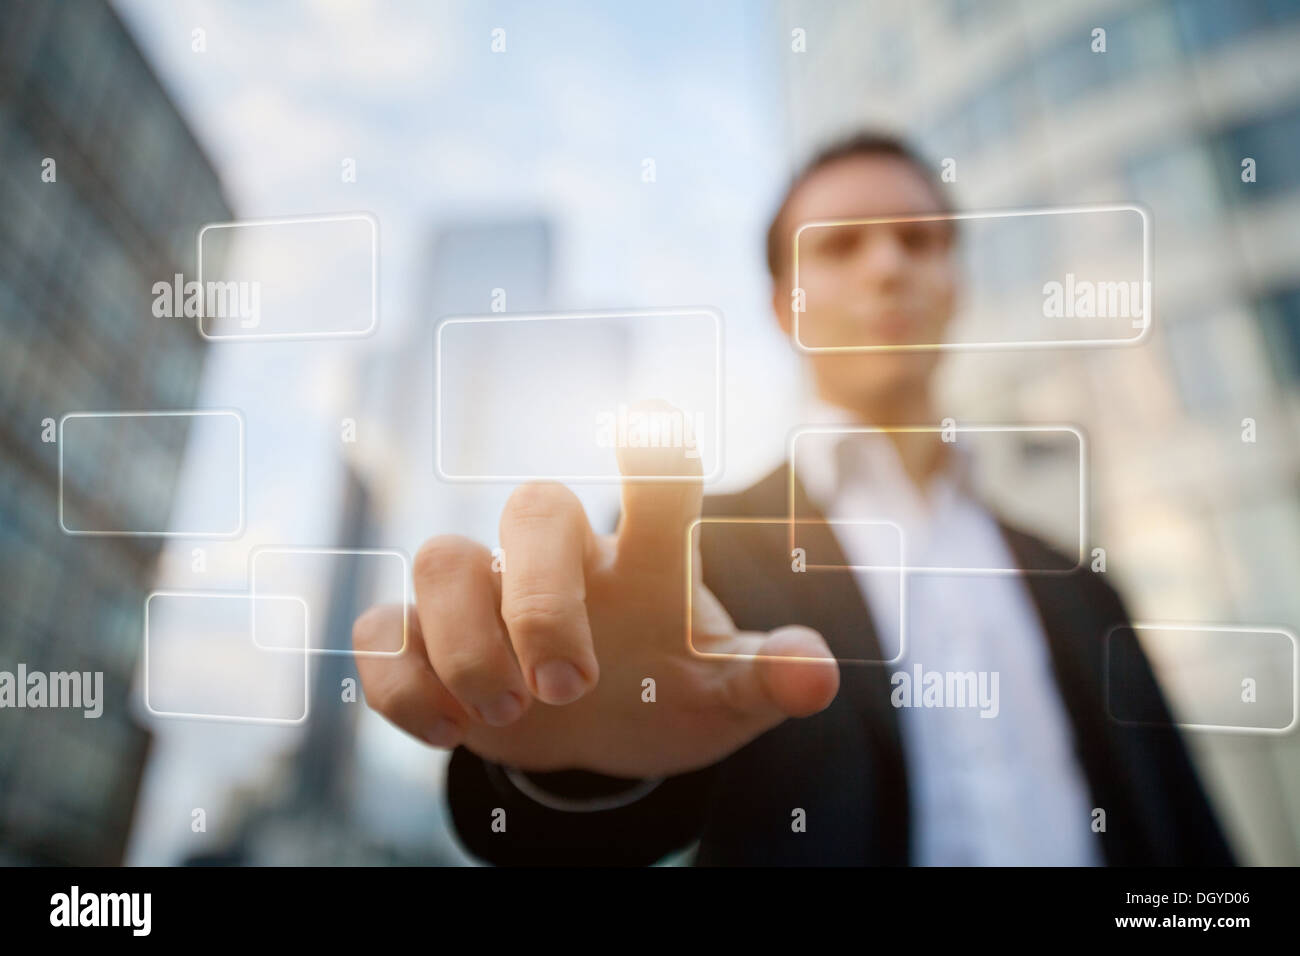 hand pushing on a touch screen interface on business buildings background Stock Photo